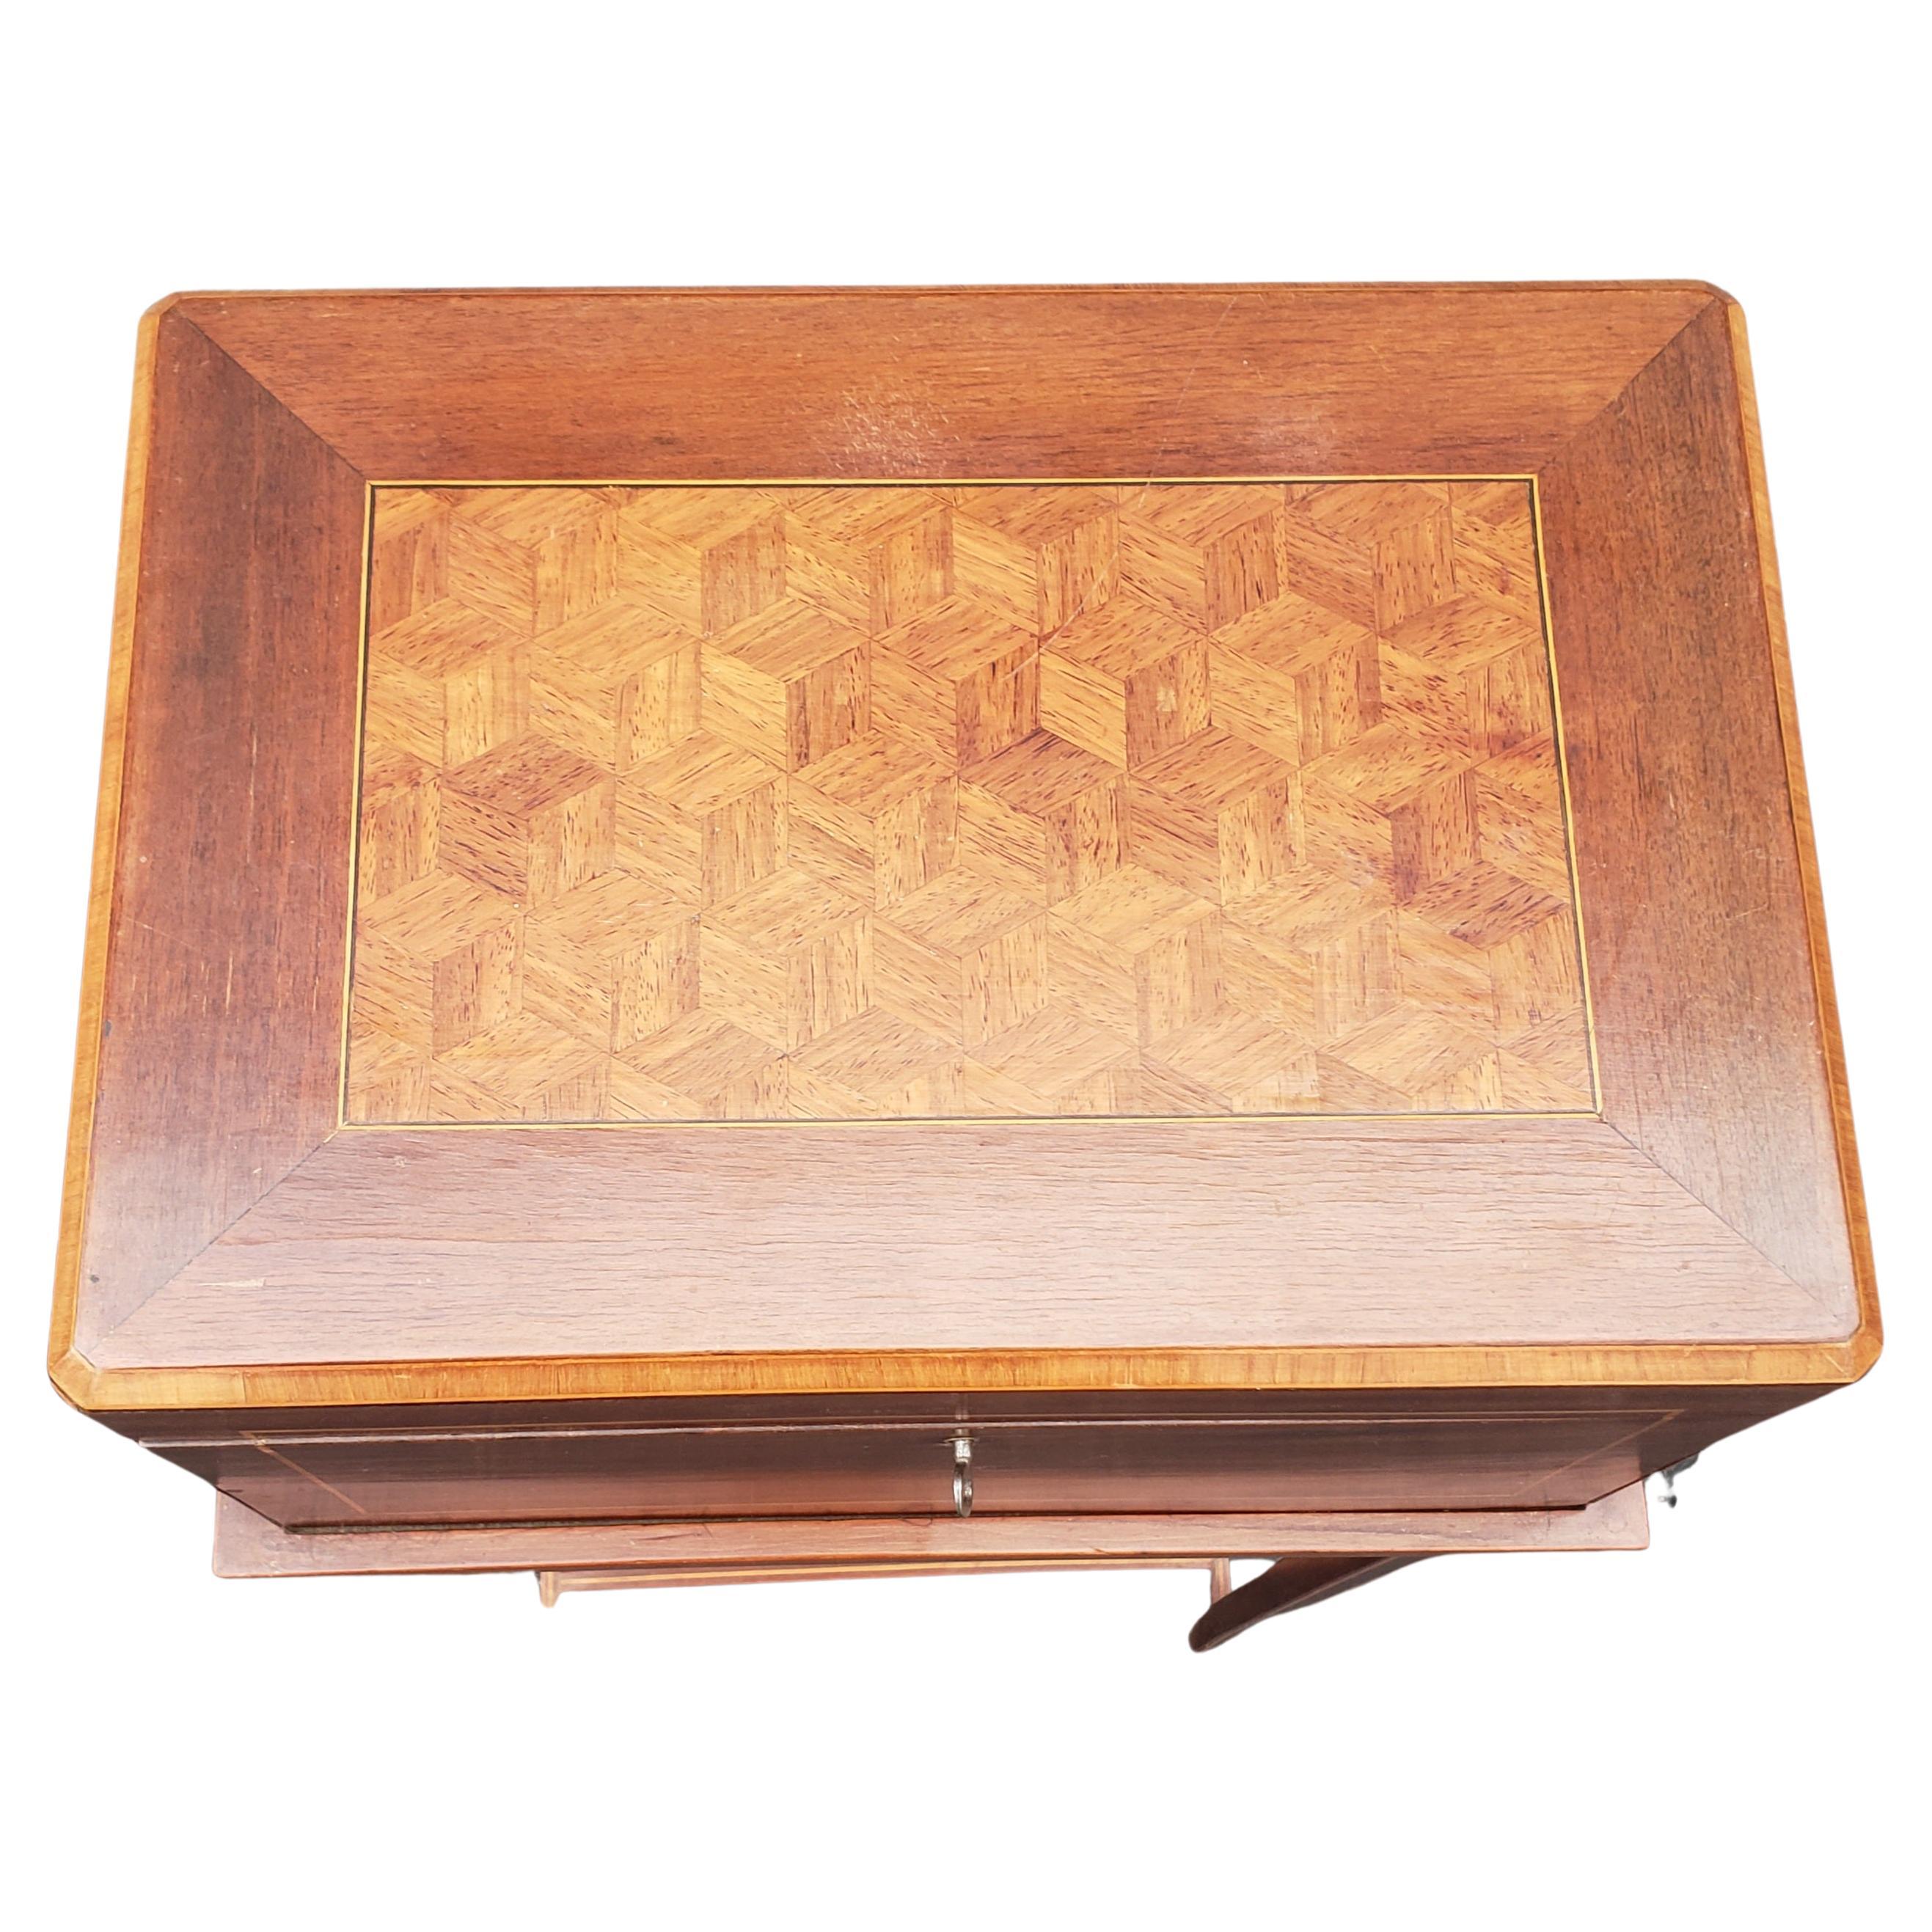 20th Century George III Style Parquetry Mahogany and Satinwood Dresser Box On Stand with Tray For Sale